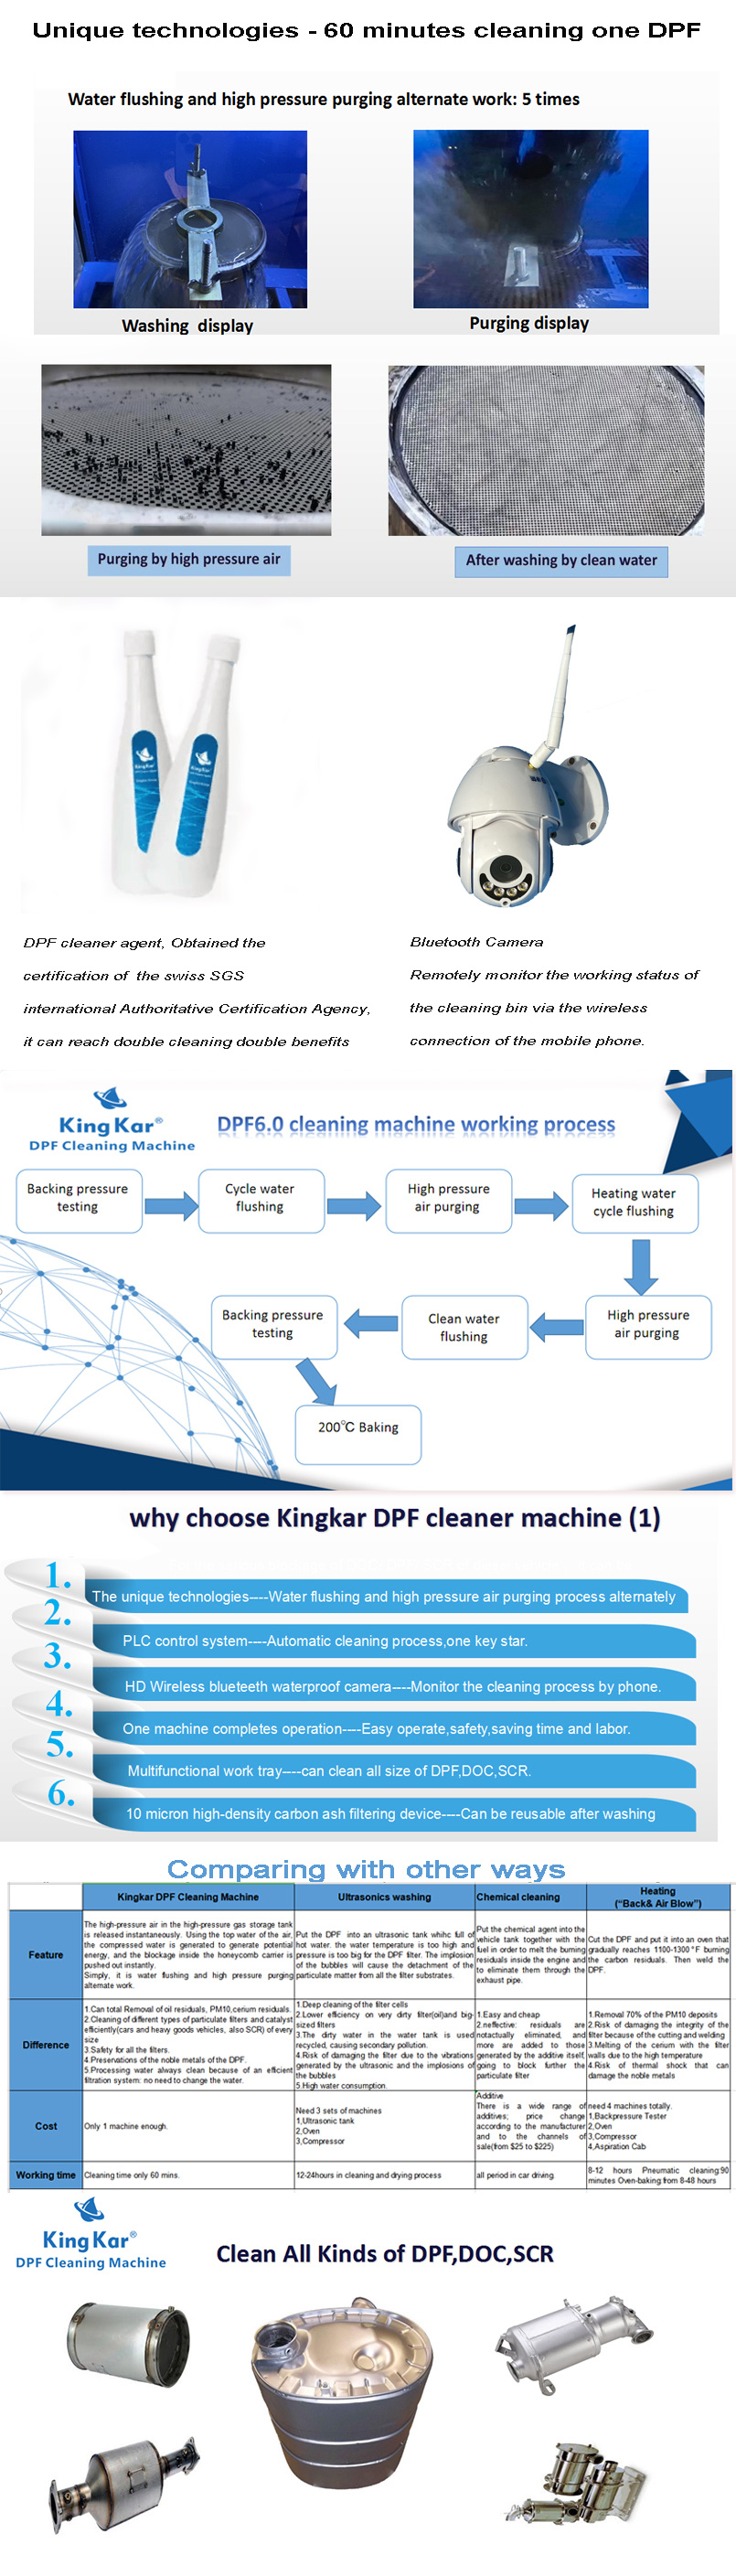 Car Care Safely and Effectively DPF Diesel Particulate Filter Cleaner